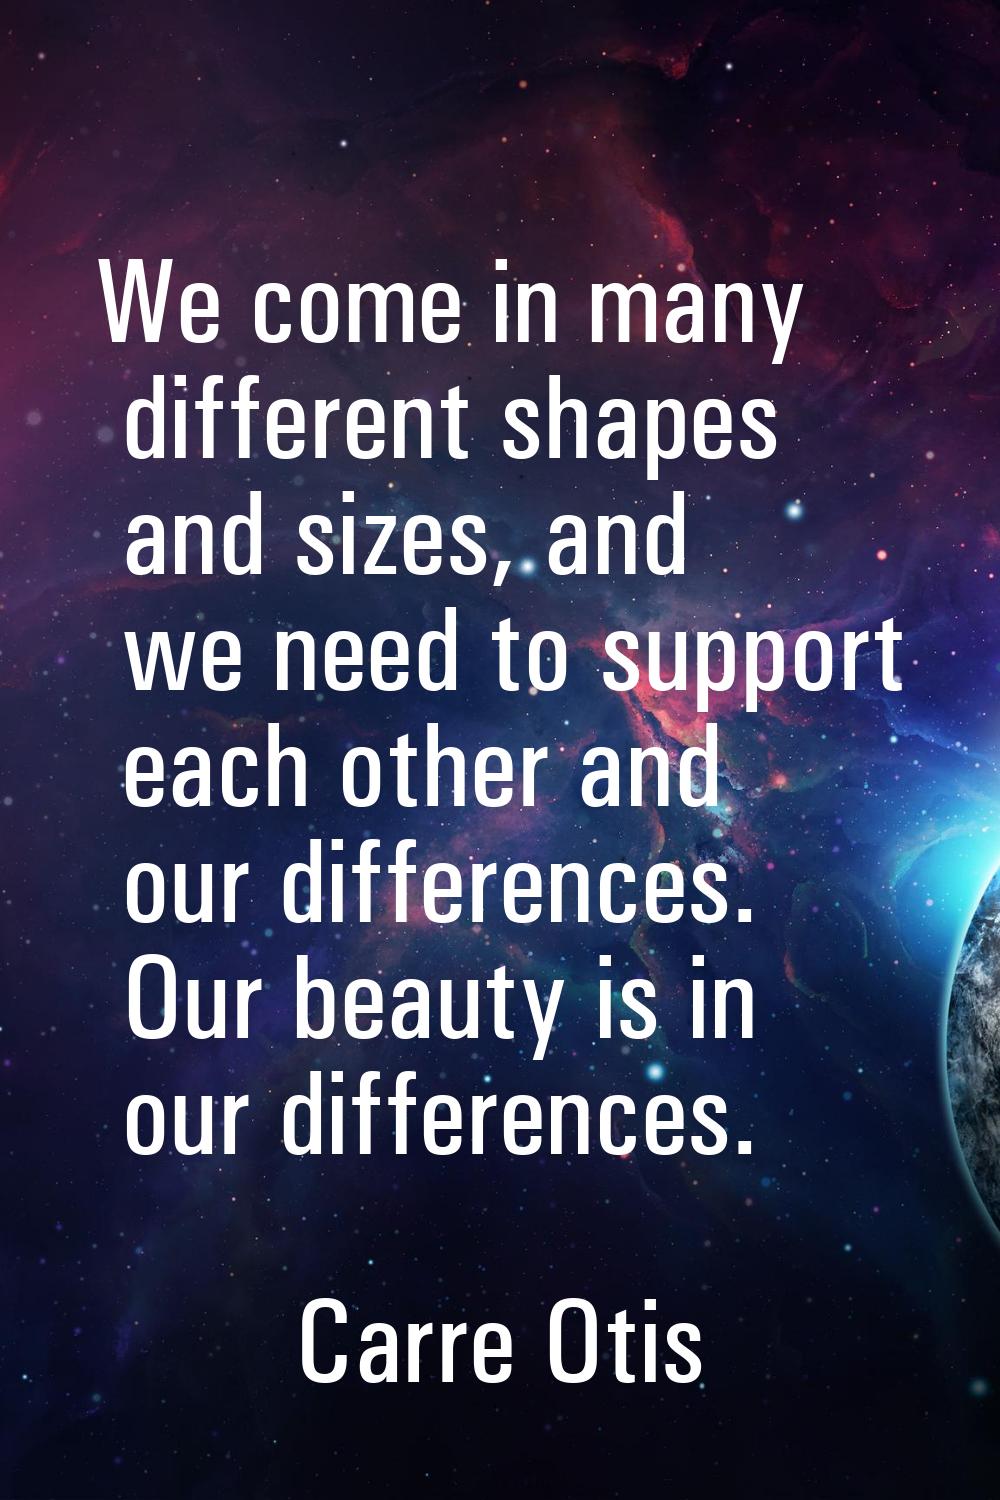 We come in many different shapes and sizes, and we need to support each other and our differences. 